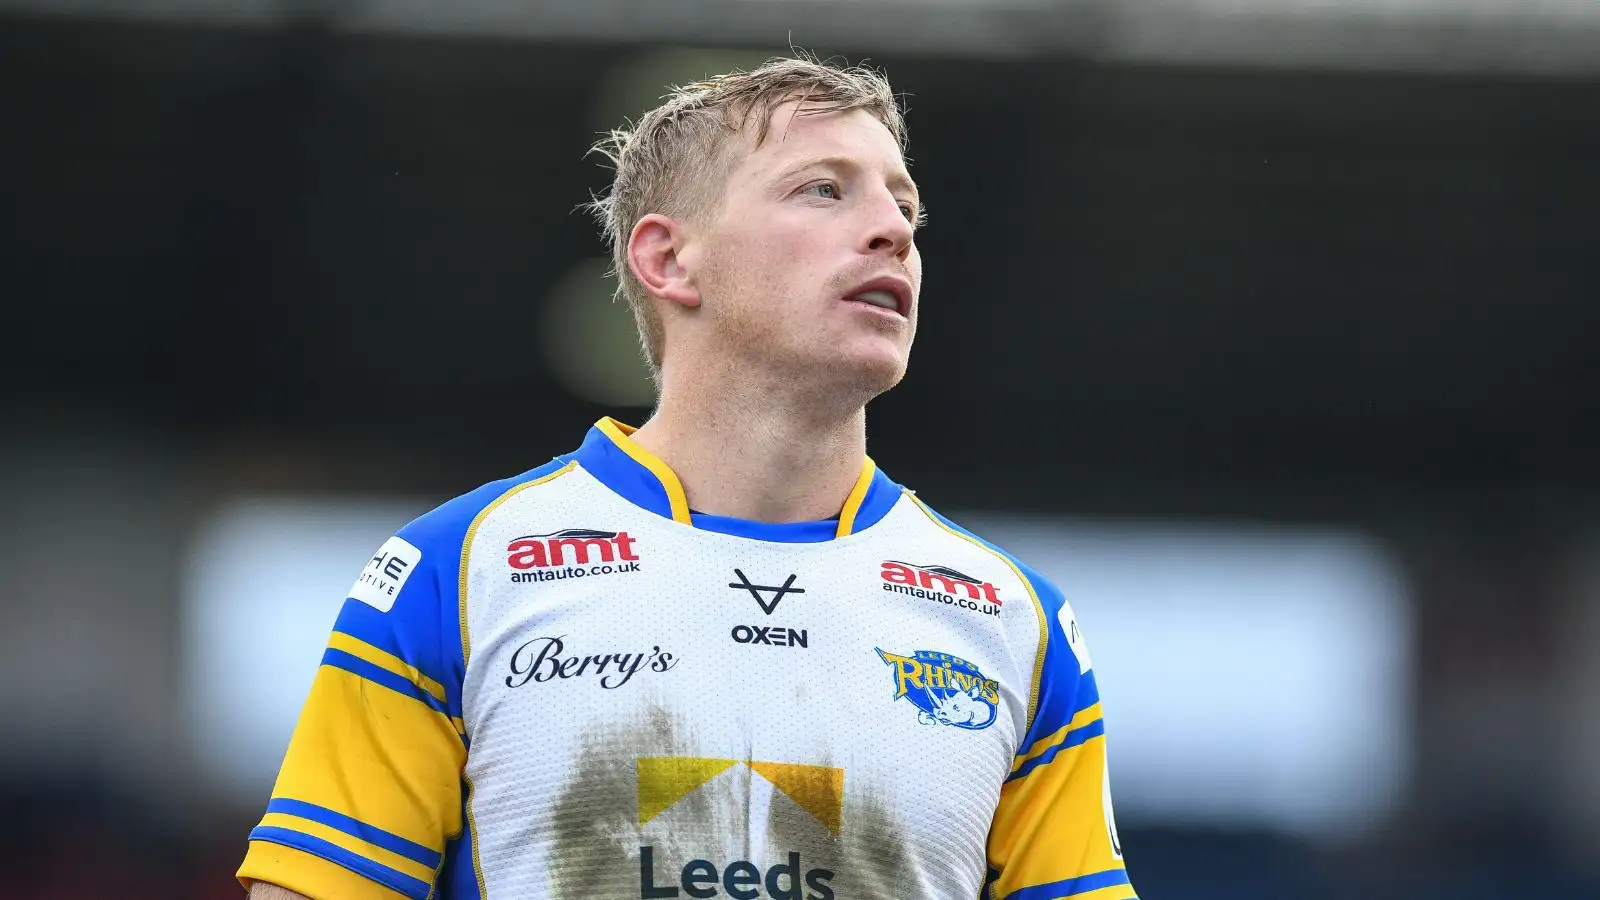 Sky Sports pundits attack Leeds Rhinos dropout policy as Rohan Smith addresses controversial play